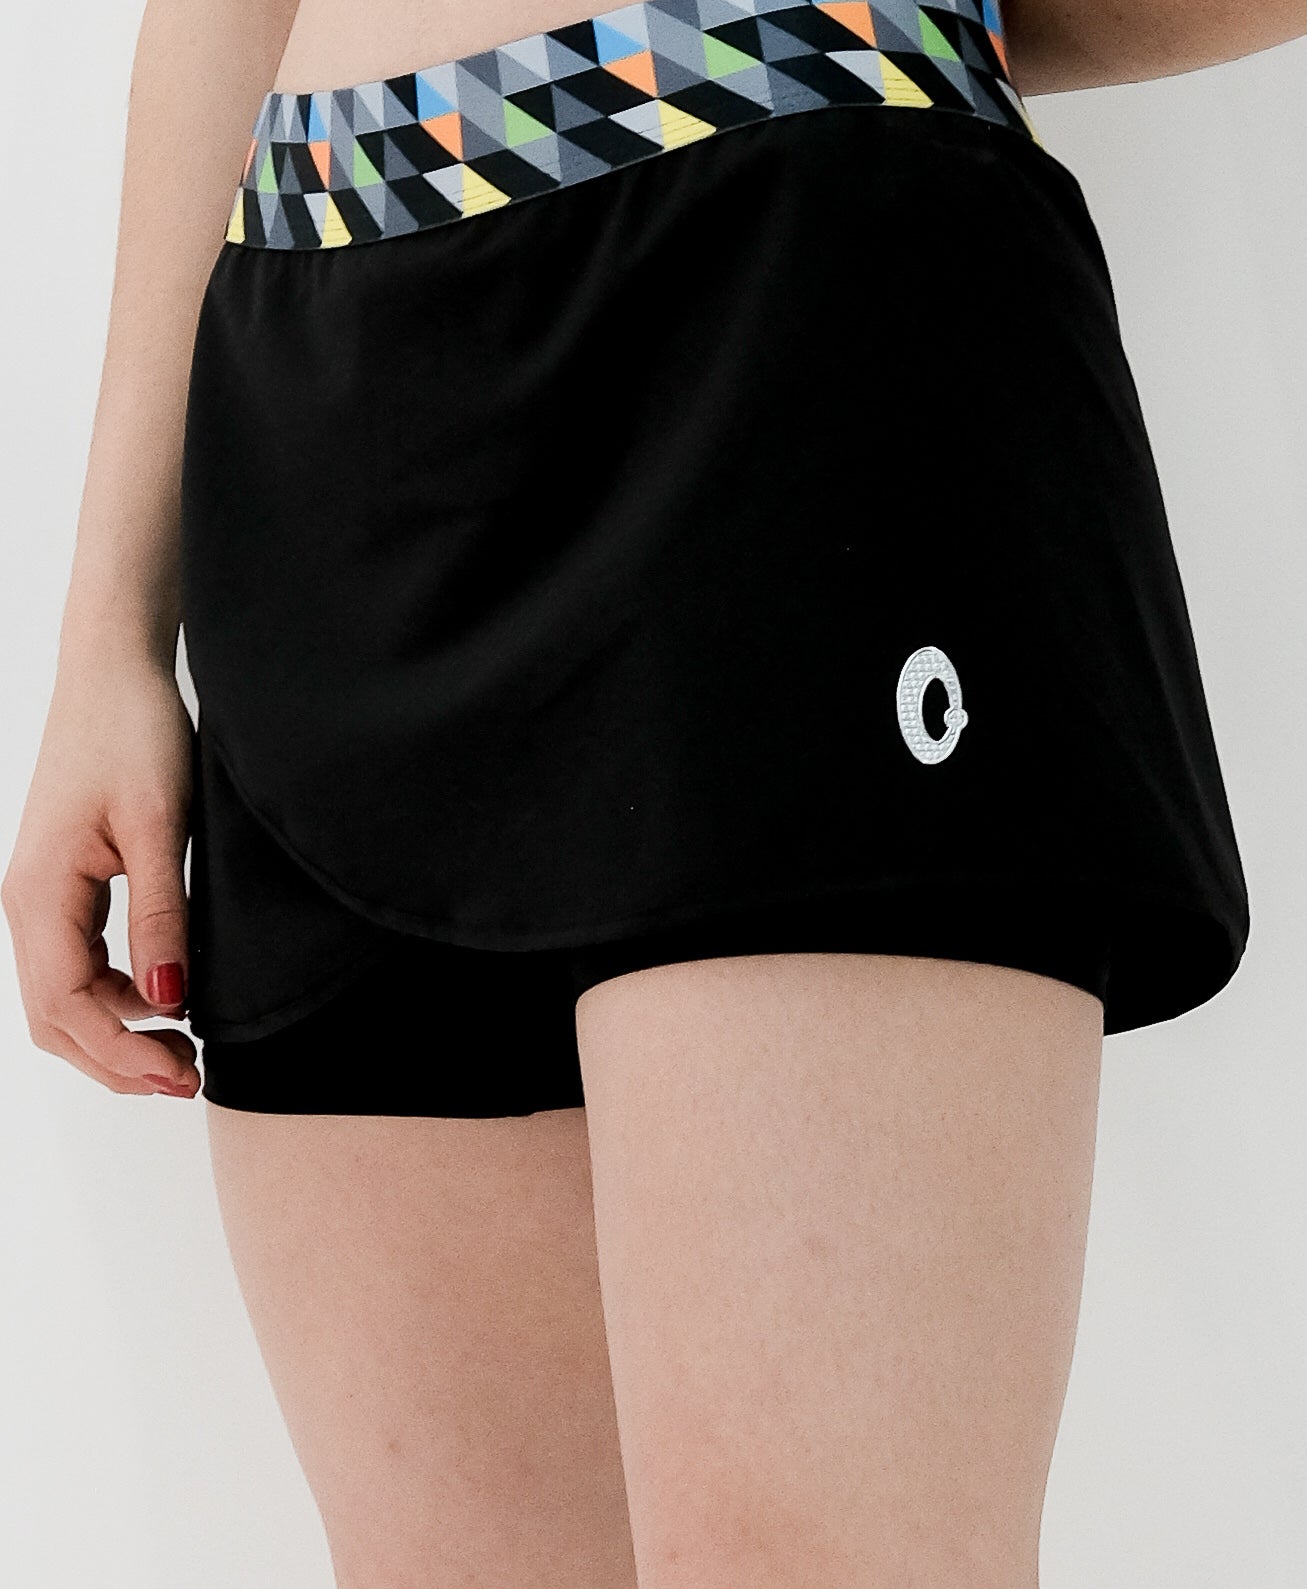 WOMEN'S SKIRT WITH RECYCLED BLACK LYCRA